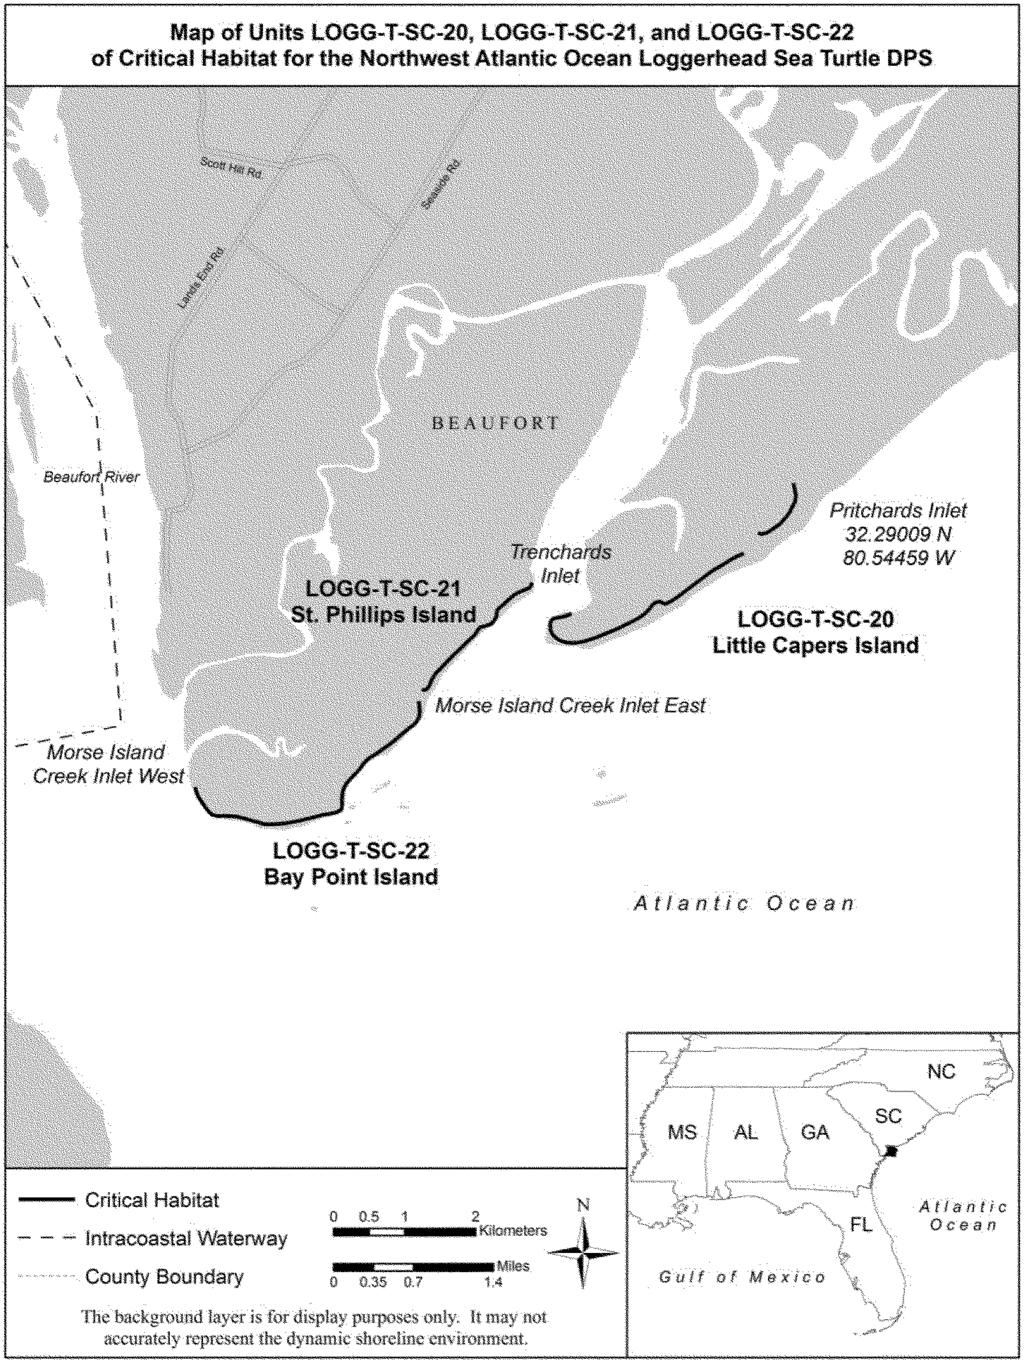 18058 Federal Register / Vol. 78, No. 57 / Monday, March 25, 2013 / Proposed Rules shoreline to Morse Island Creek Inlet West along the Port Royal Sound shoreline.